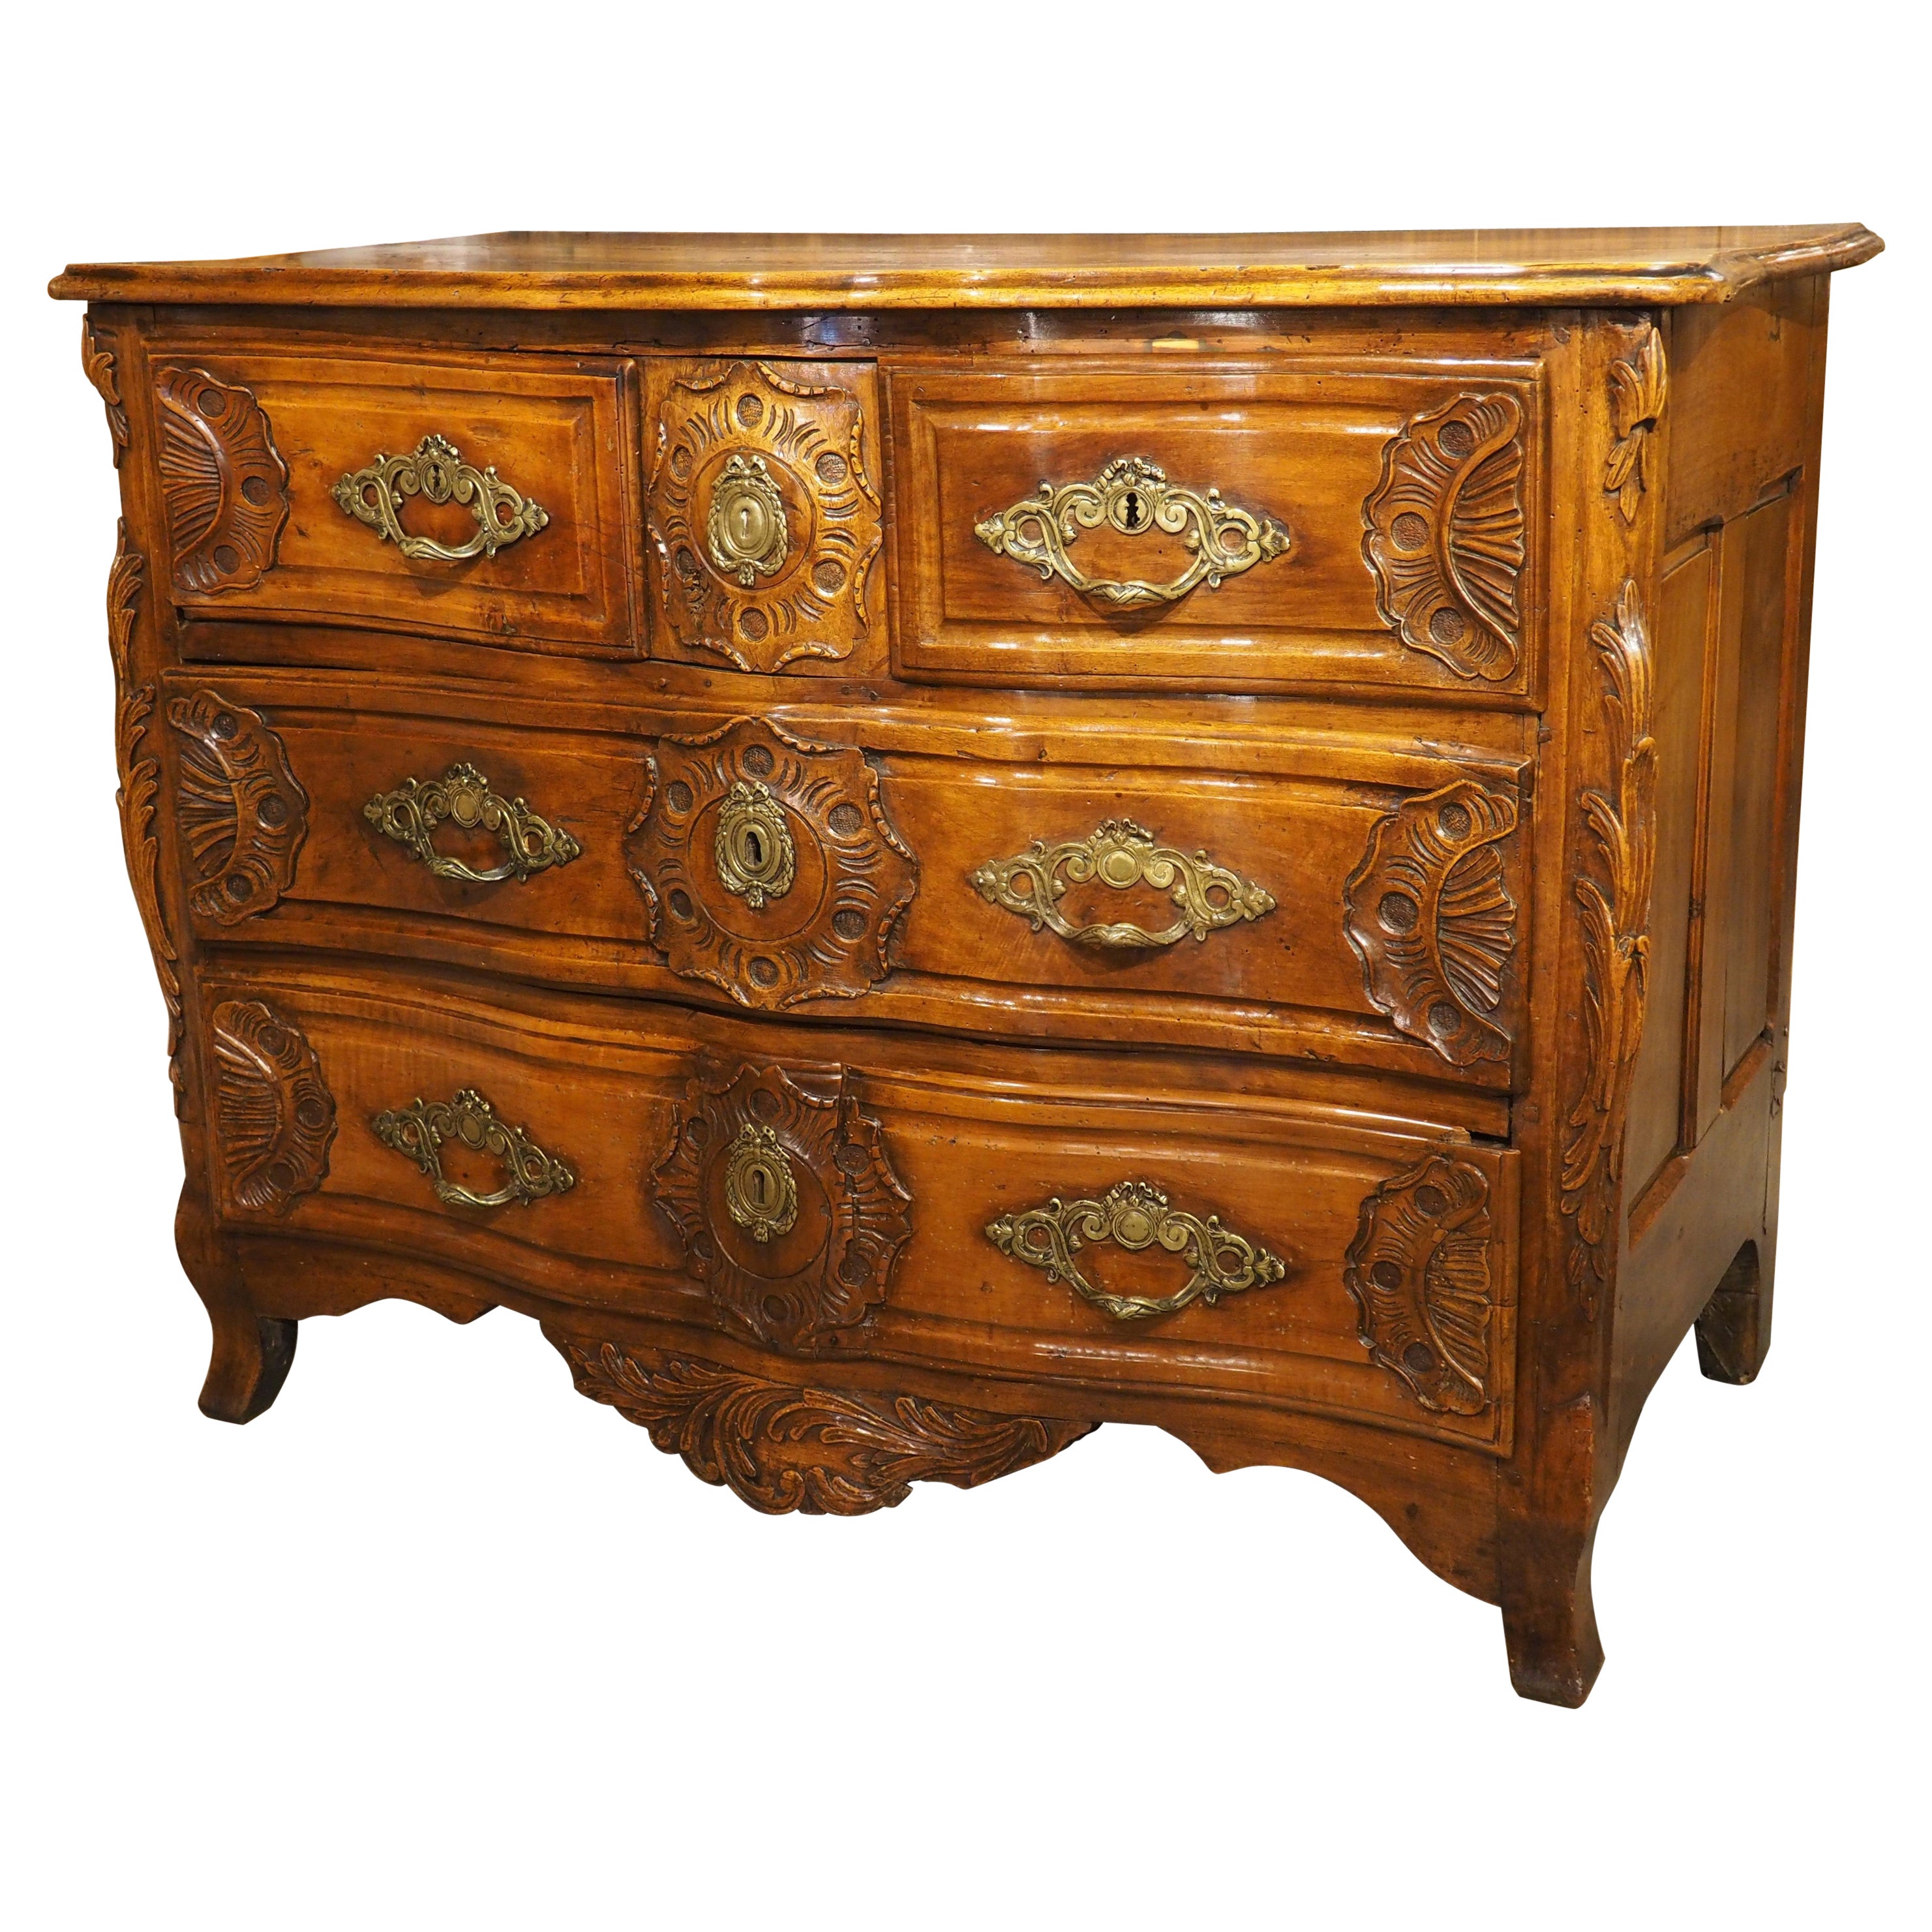 18th Century Regence Period Carved Walnut Lyonnaise Commode 'Arbalete' For Sale